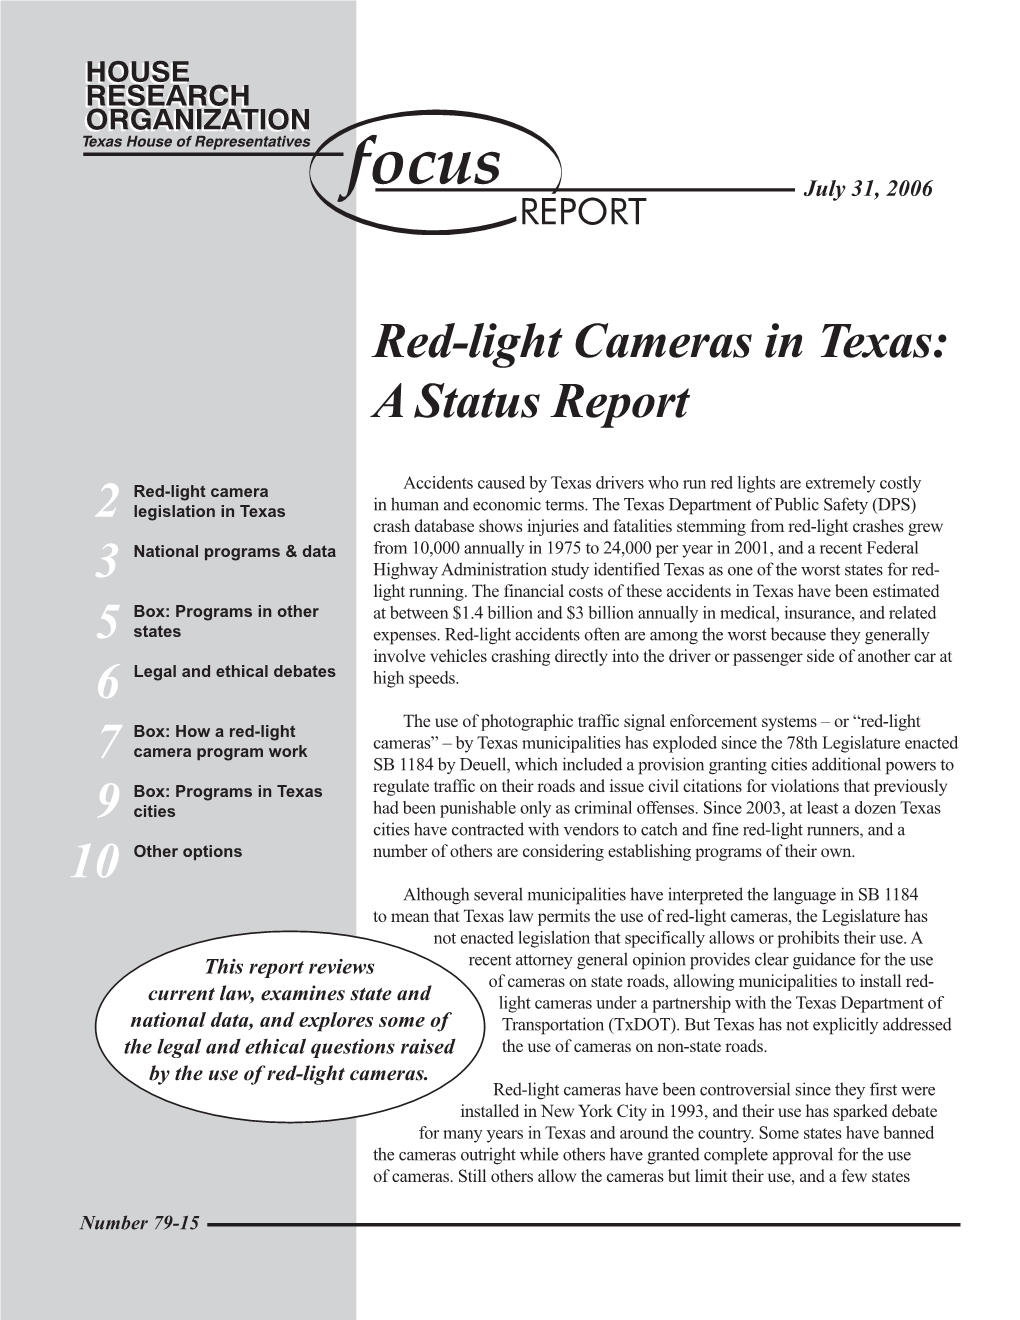 Red-Light Cameras in Texas: a Status Report